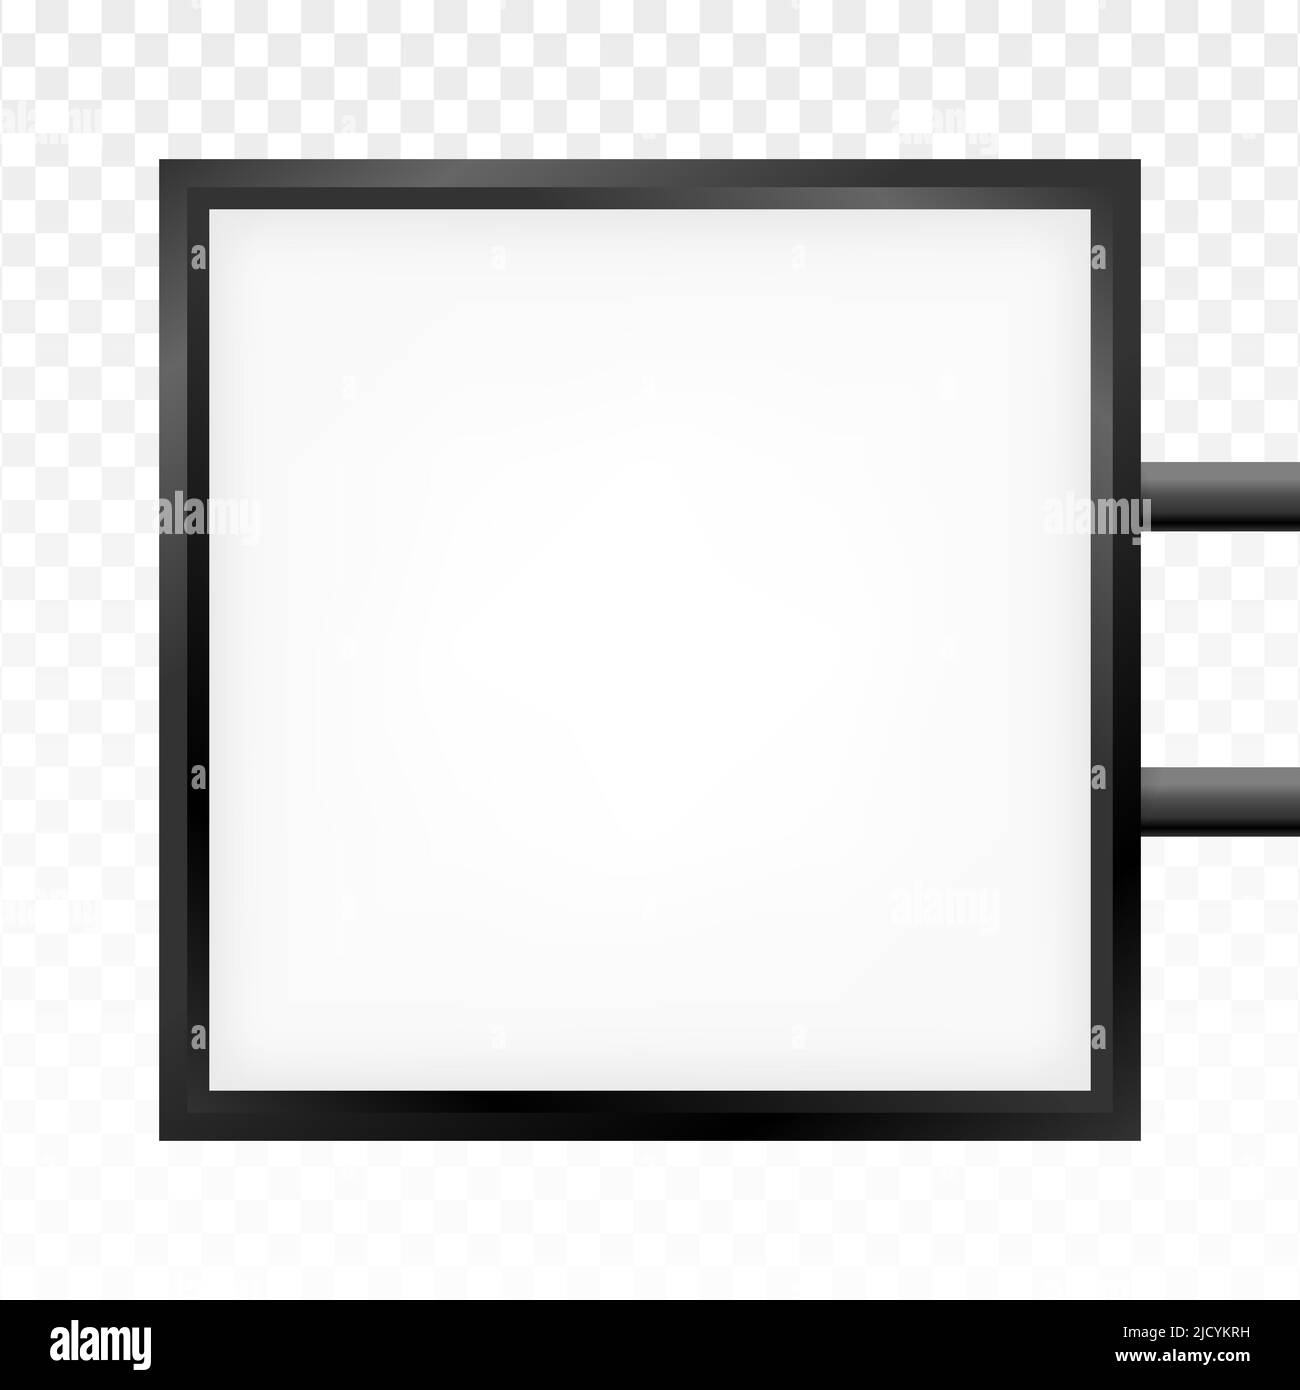 Circular signboard mock up isolated on gray background. Circular illuminated lightbox with empty space for design. Stock Vector